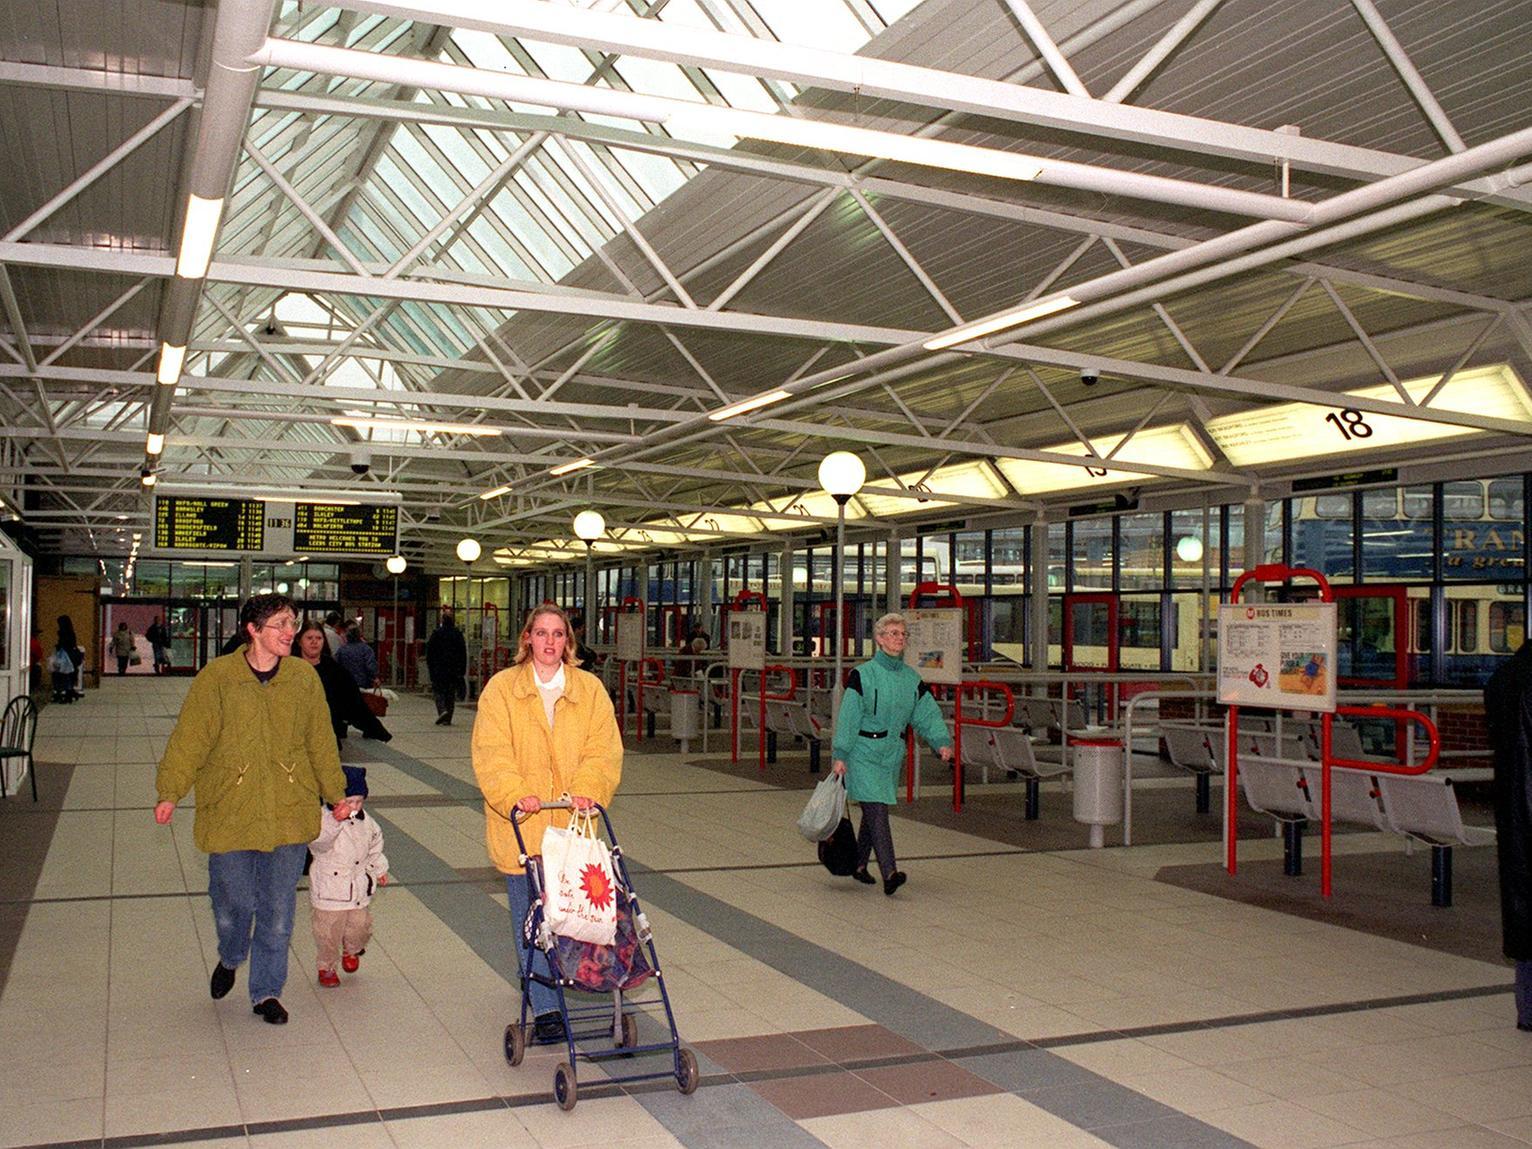 Leeds City bus station was rebuilt and reopened with National Express relocating to the site. Other bus stations on Lady Lane and Wellington Street were closed when the new station opened in March 1996.